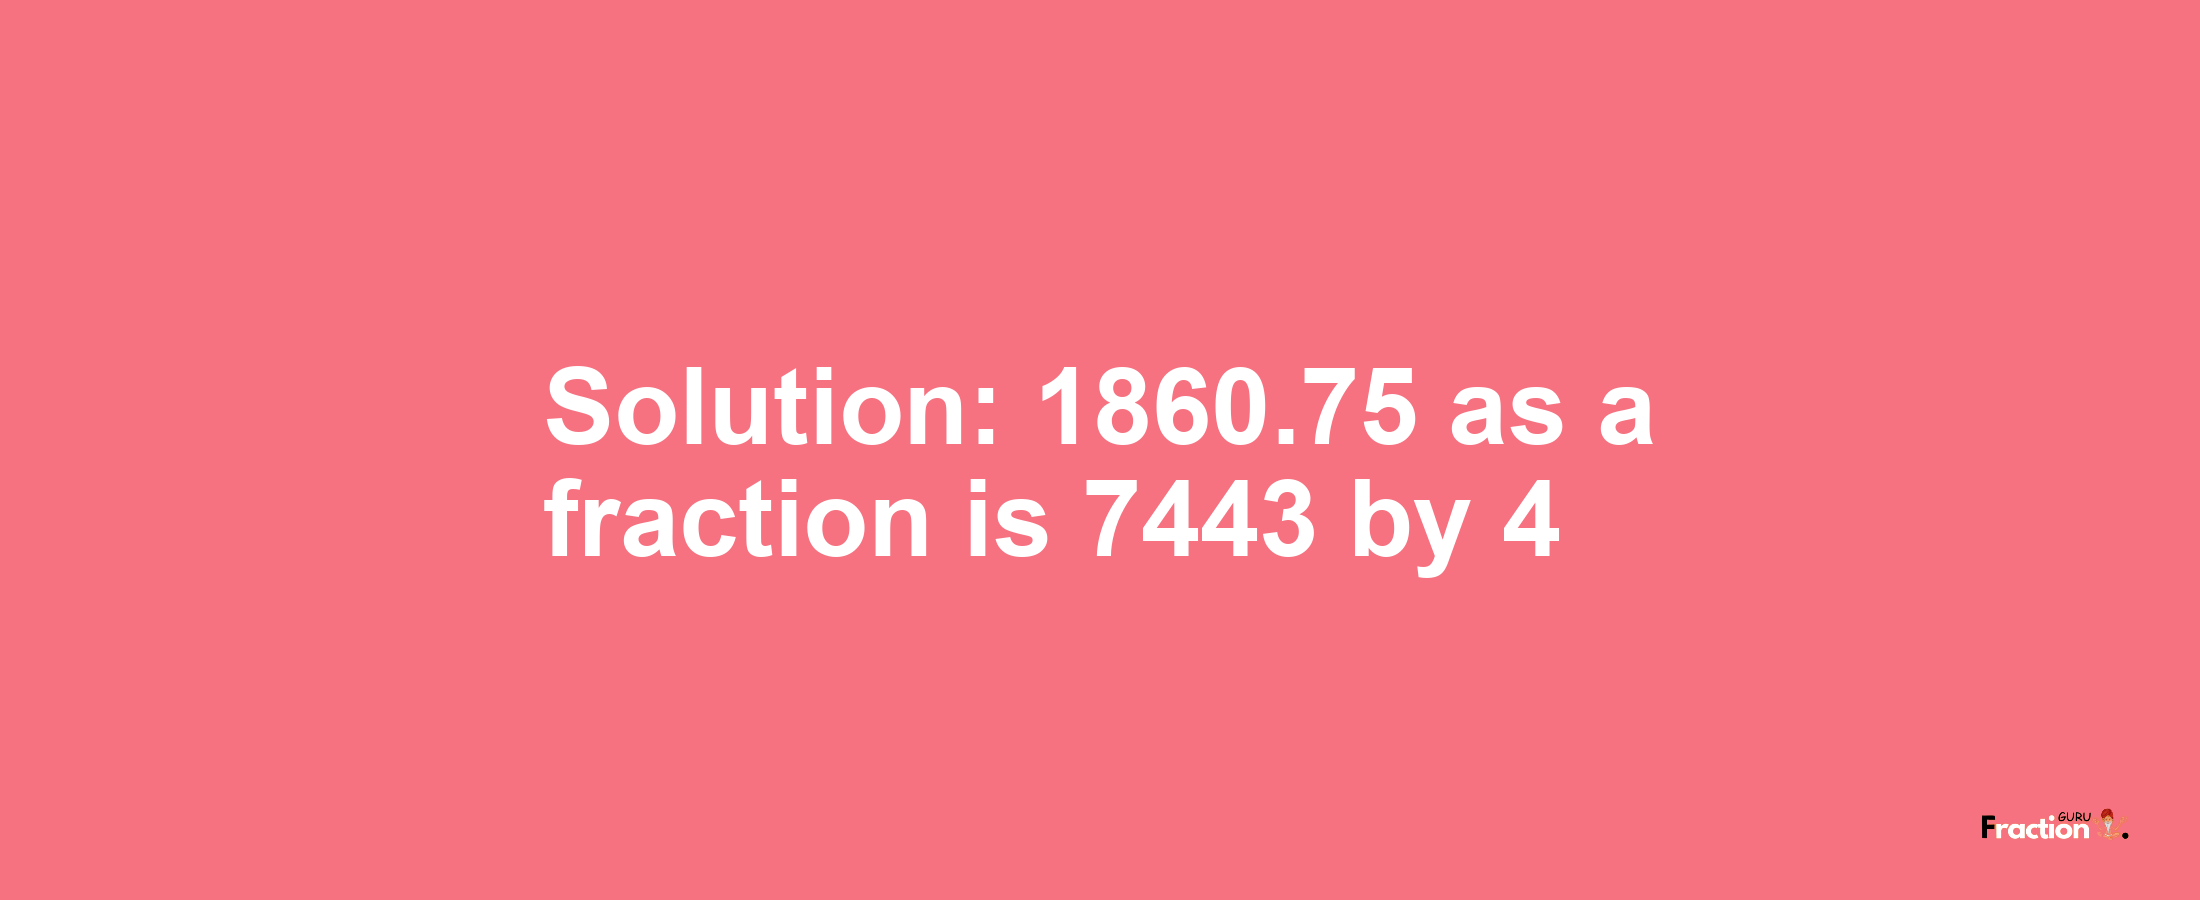 Solution:1860.75 as a fraction is 7443/4